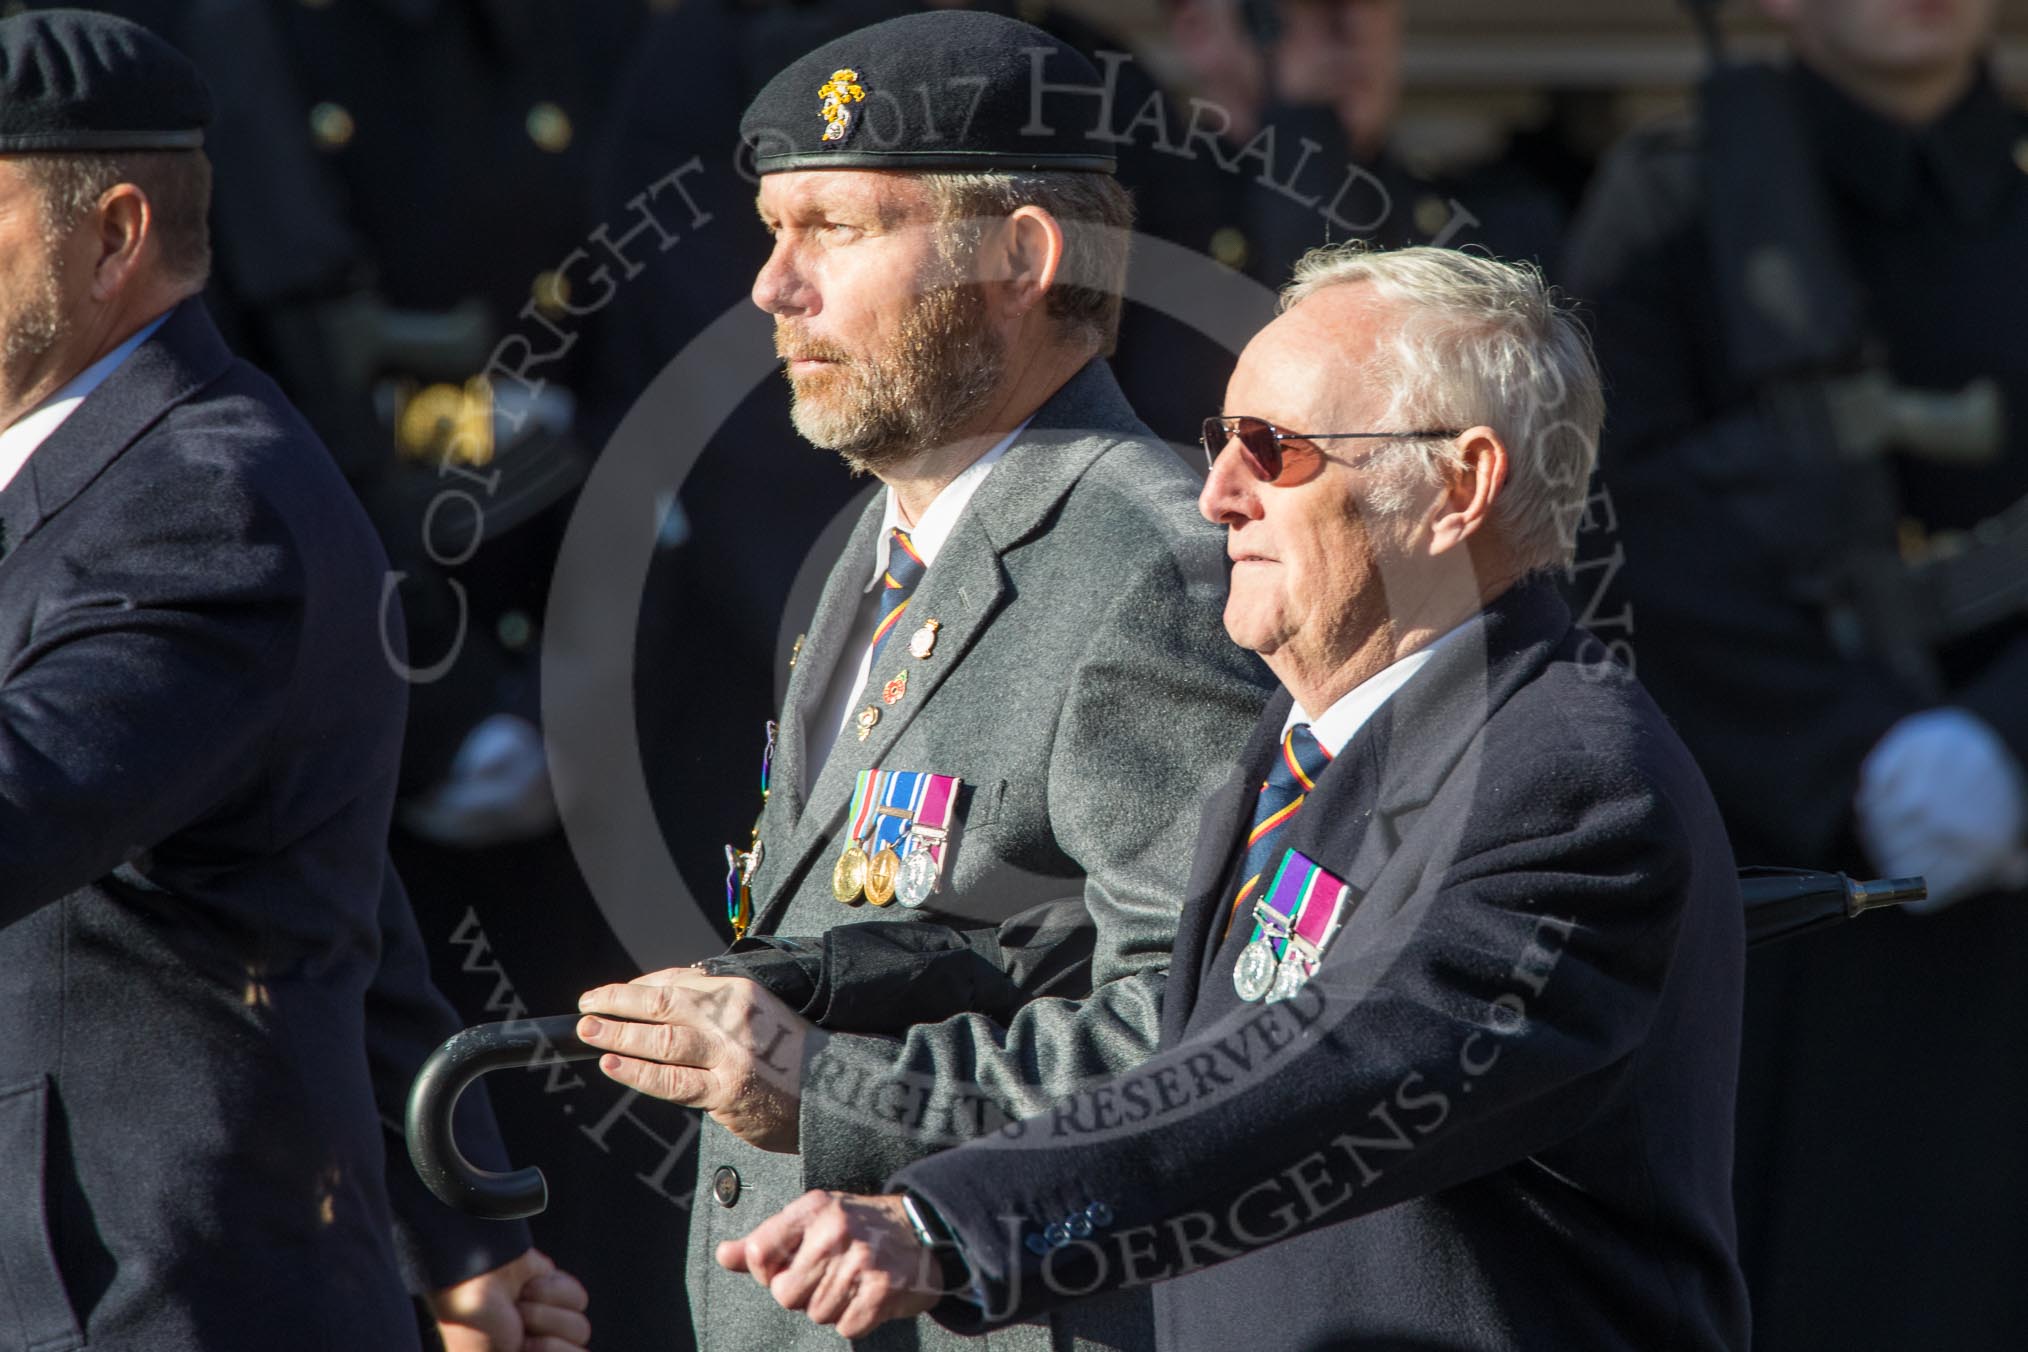 Arborfield Old Boys Association (Group B26, 29 members) during the Royal British Legion March Past on Remembrance Sunday at the Cenotaph, Whitehall, Westminster, London, 11 November 2018, 12:11.